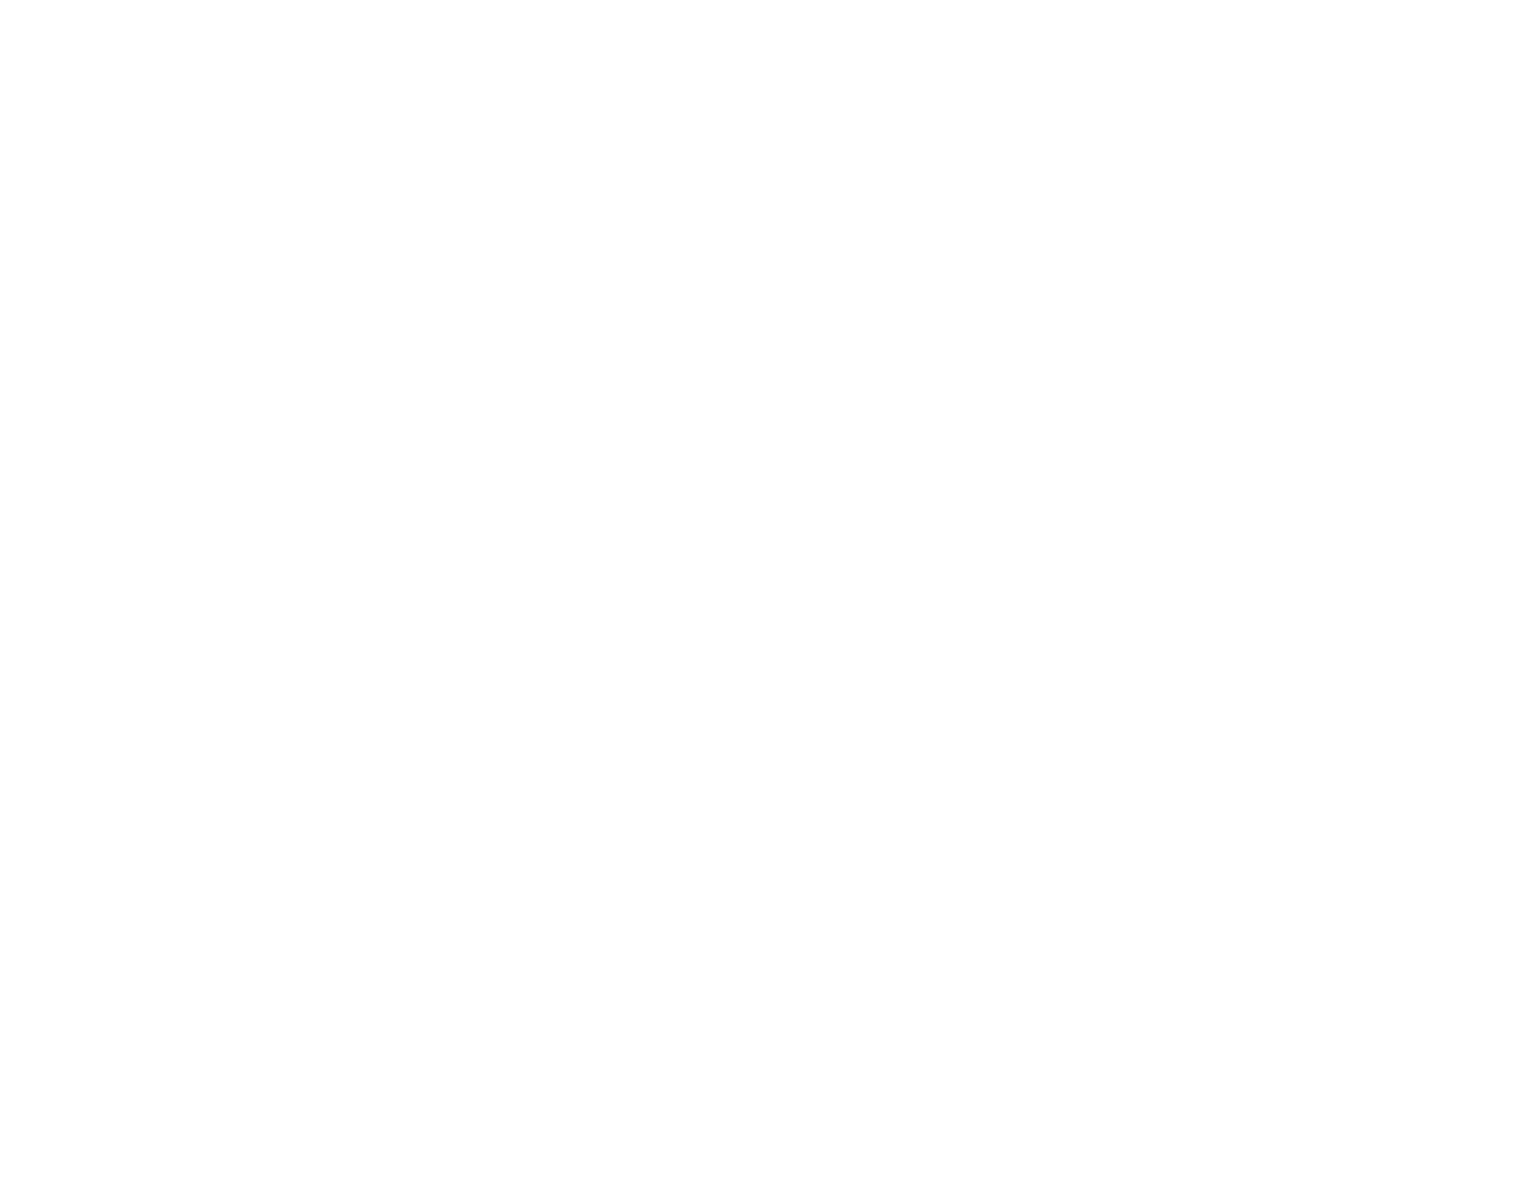 Puma Clipart Transparent Background, Puma Logo Cheetah Panther Icon, Beast,  Zoo, Predator PNG Image For Free Download